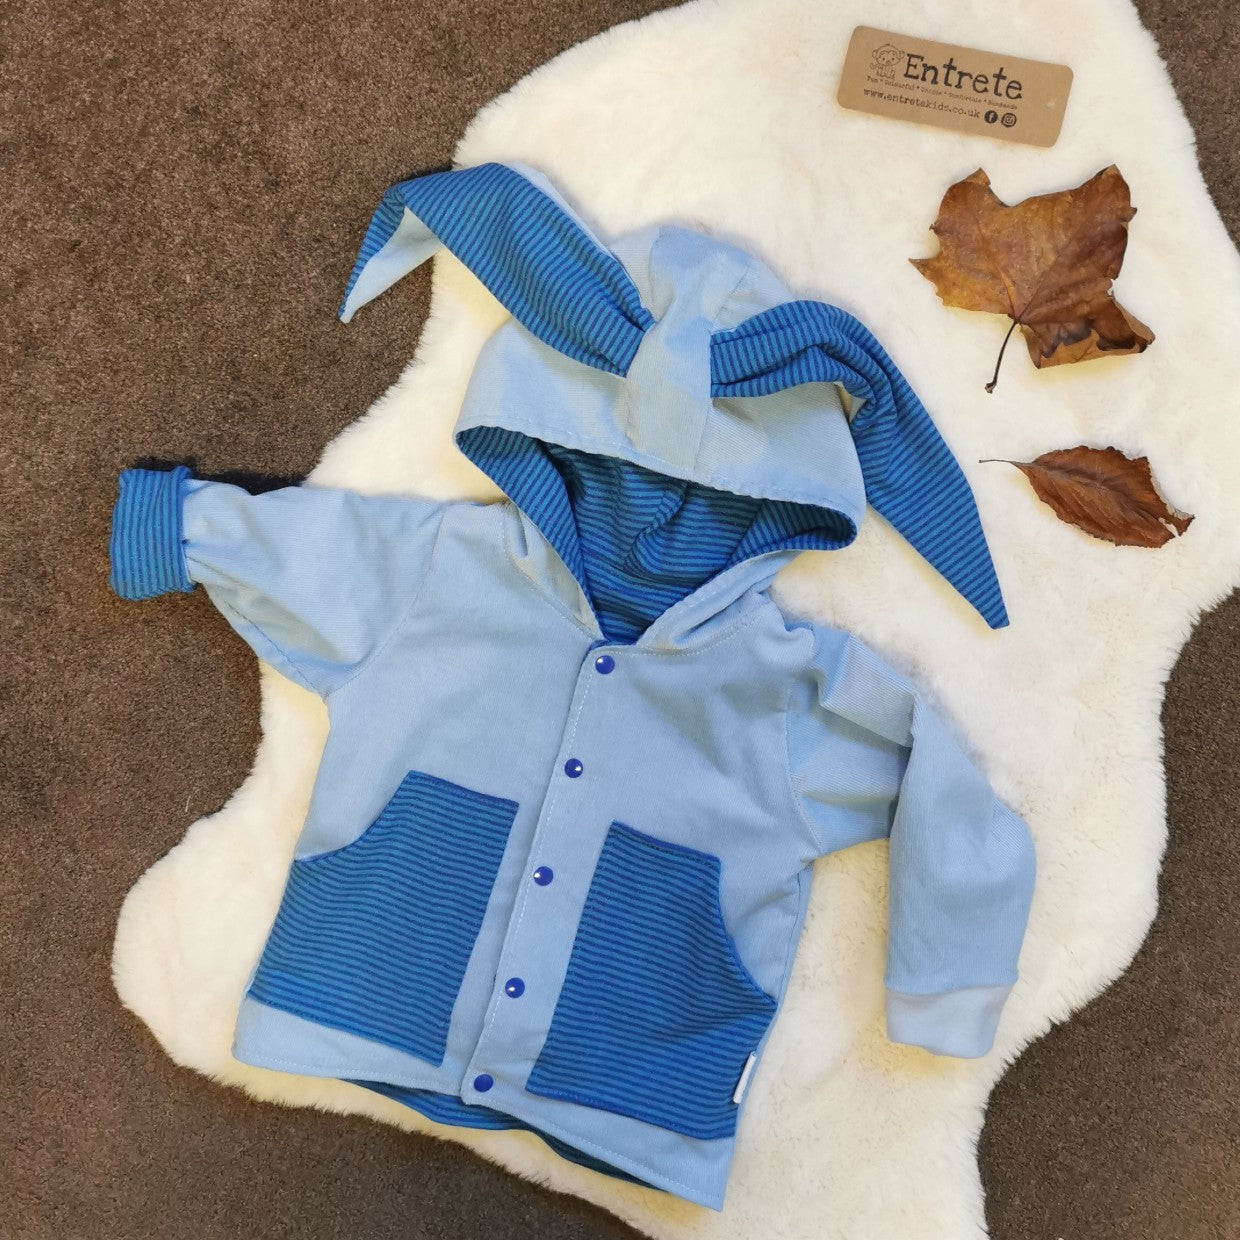 Blue corduroy bunny coat, with aqua and cobalt striped front pockets and bunny ears.